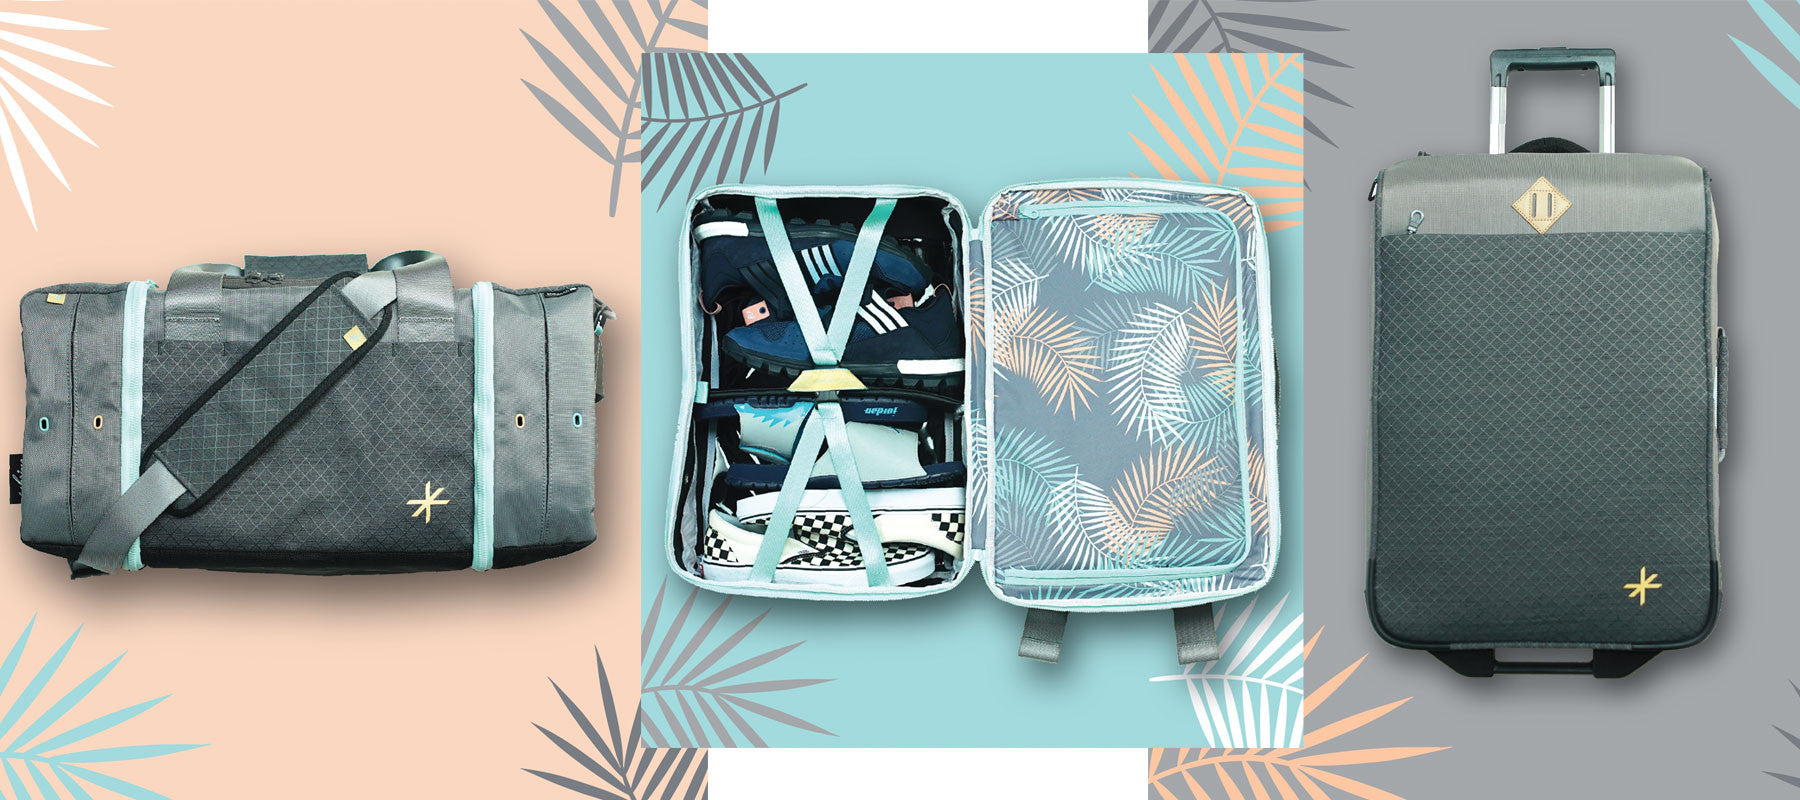 Announcing our 2017 Summer Luggage Set: Palmz Collection